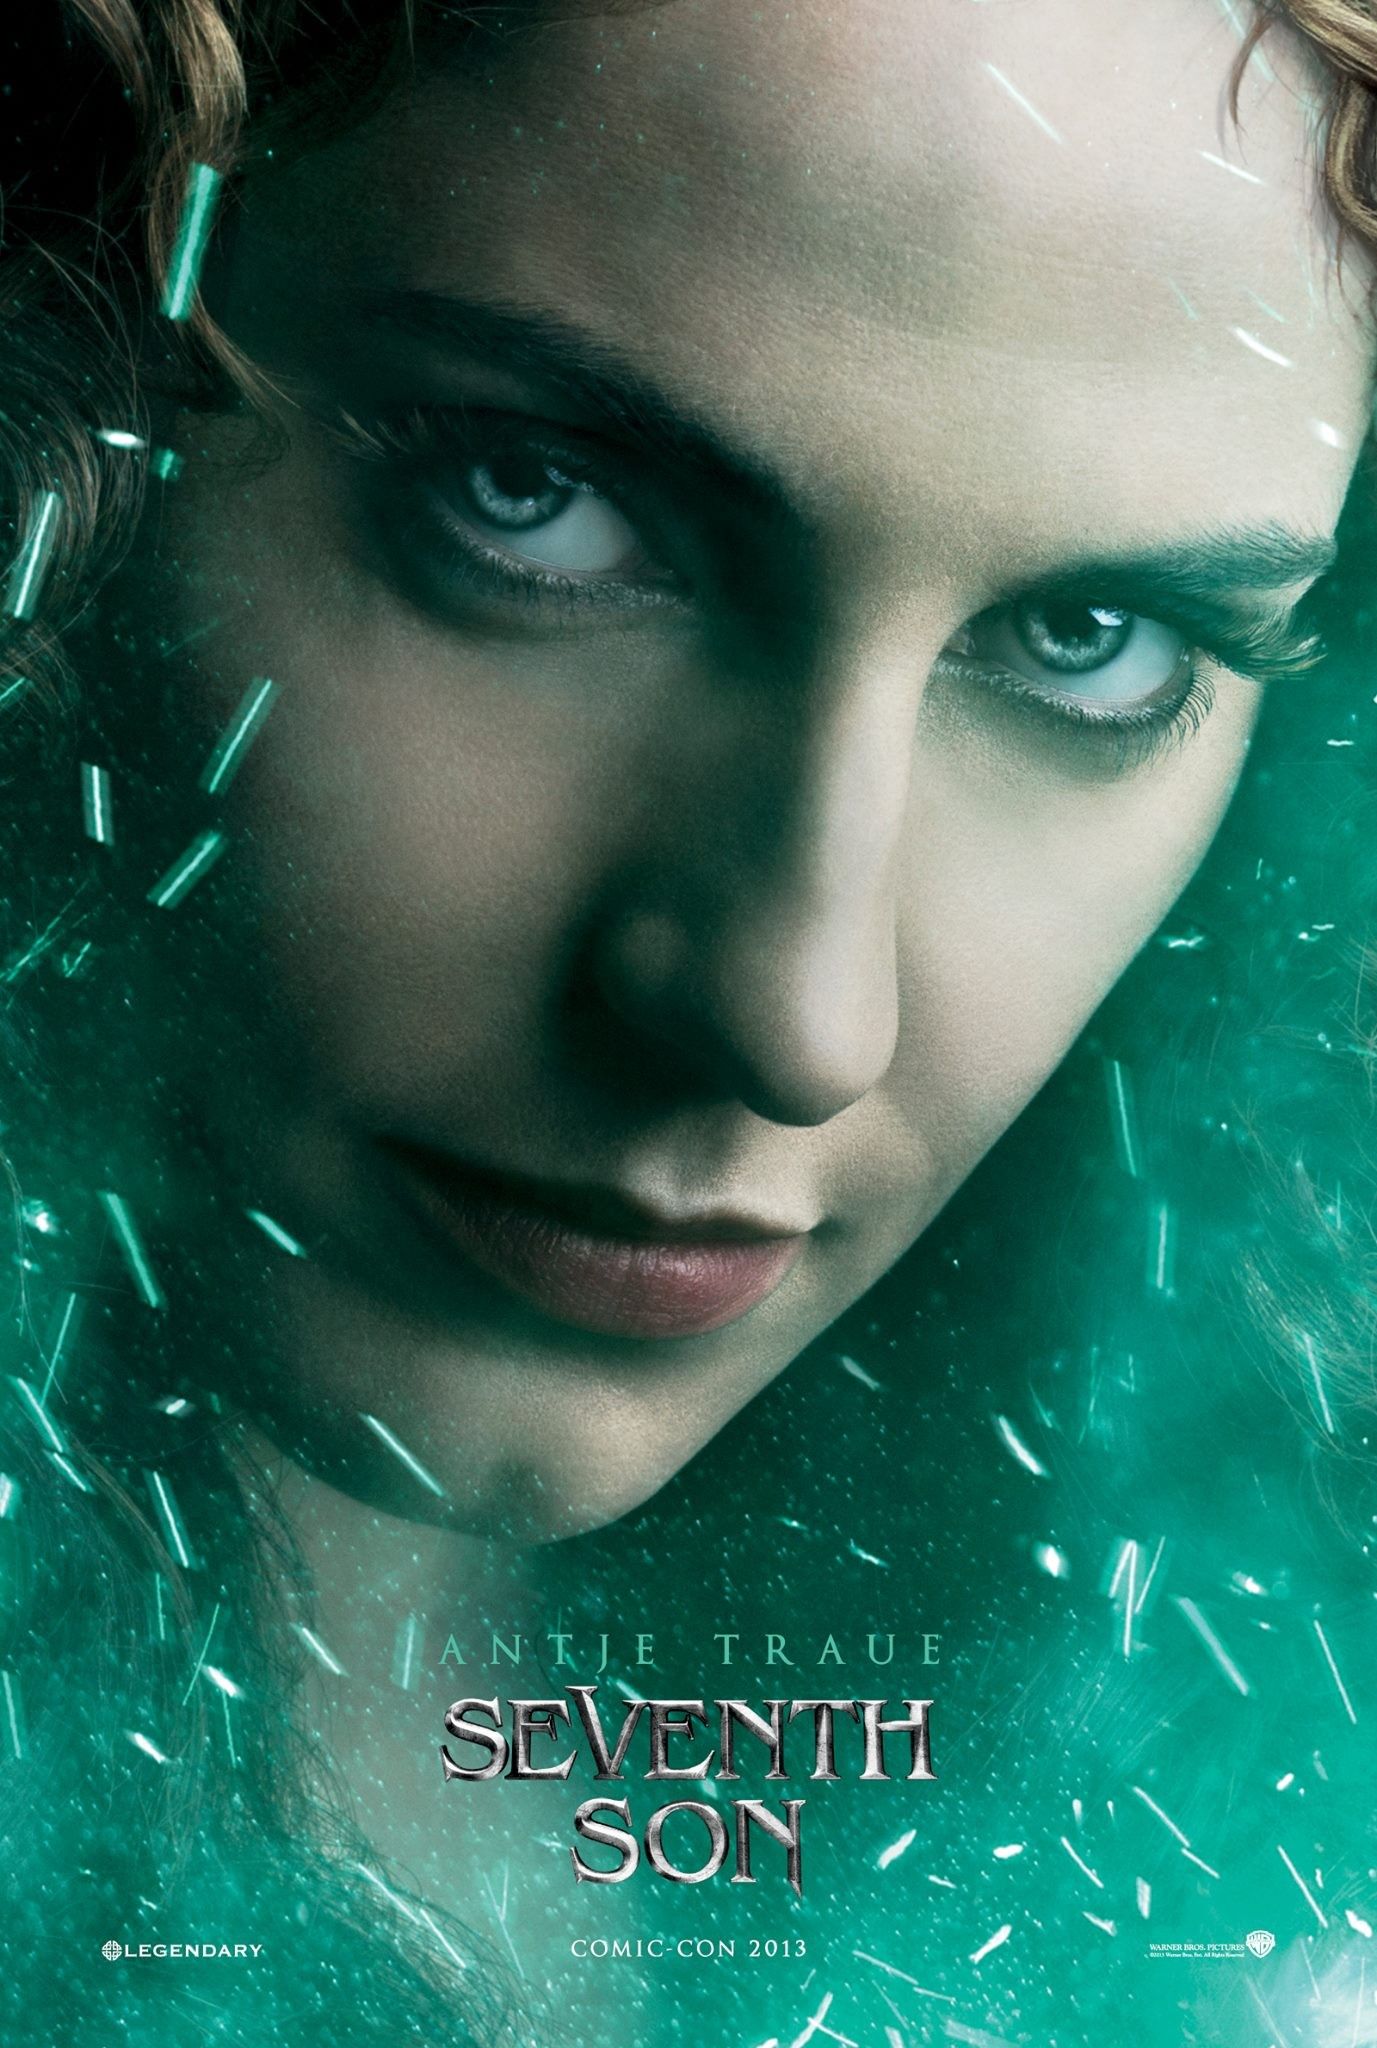 Seventh Son Antje Traue Character Poster